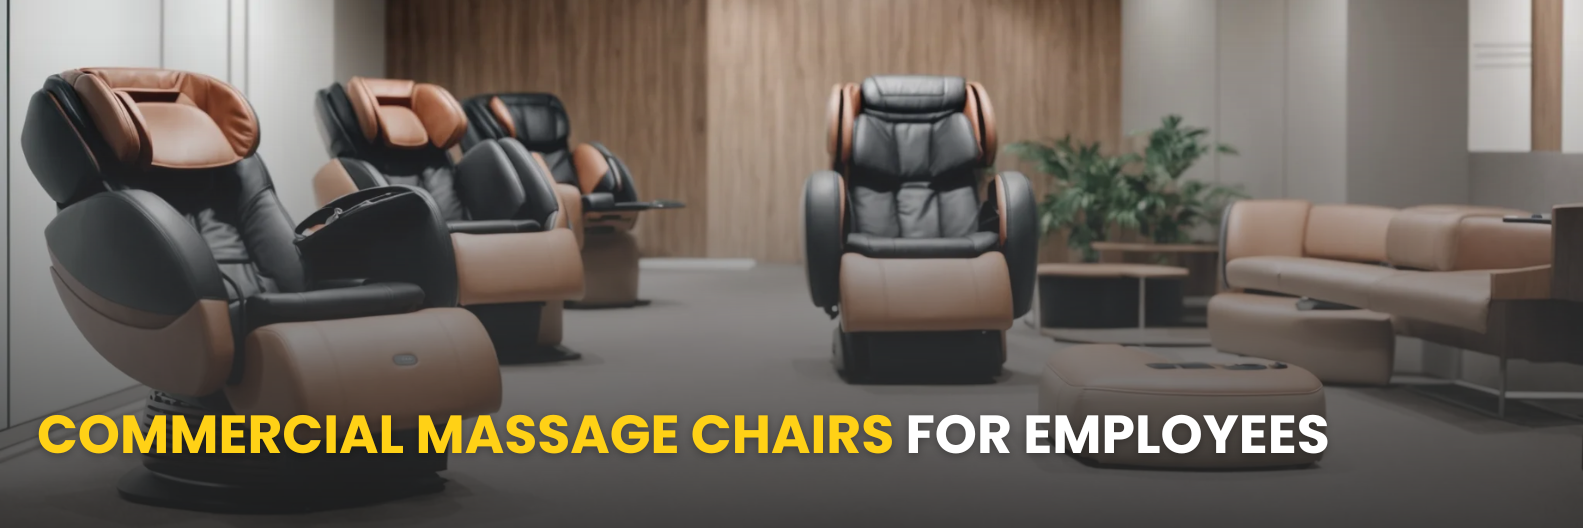 Introducing commercial massage chairs into the workplace provides employees with a convenient and effective way to reduce stress, boost morale, and enhance overall productivity during their breaks.